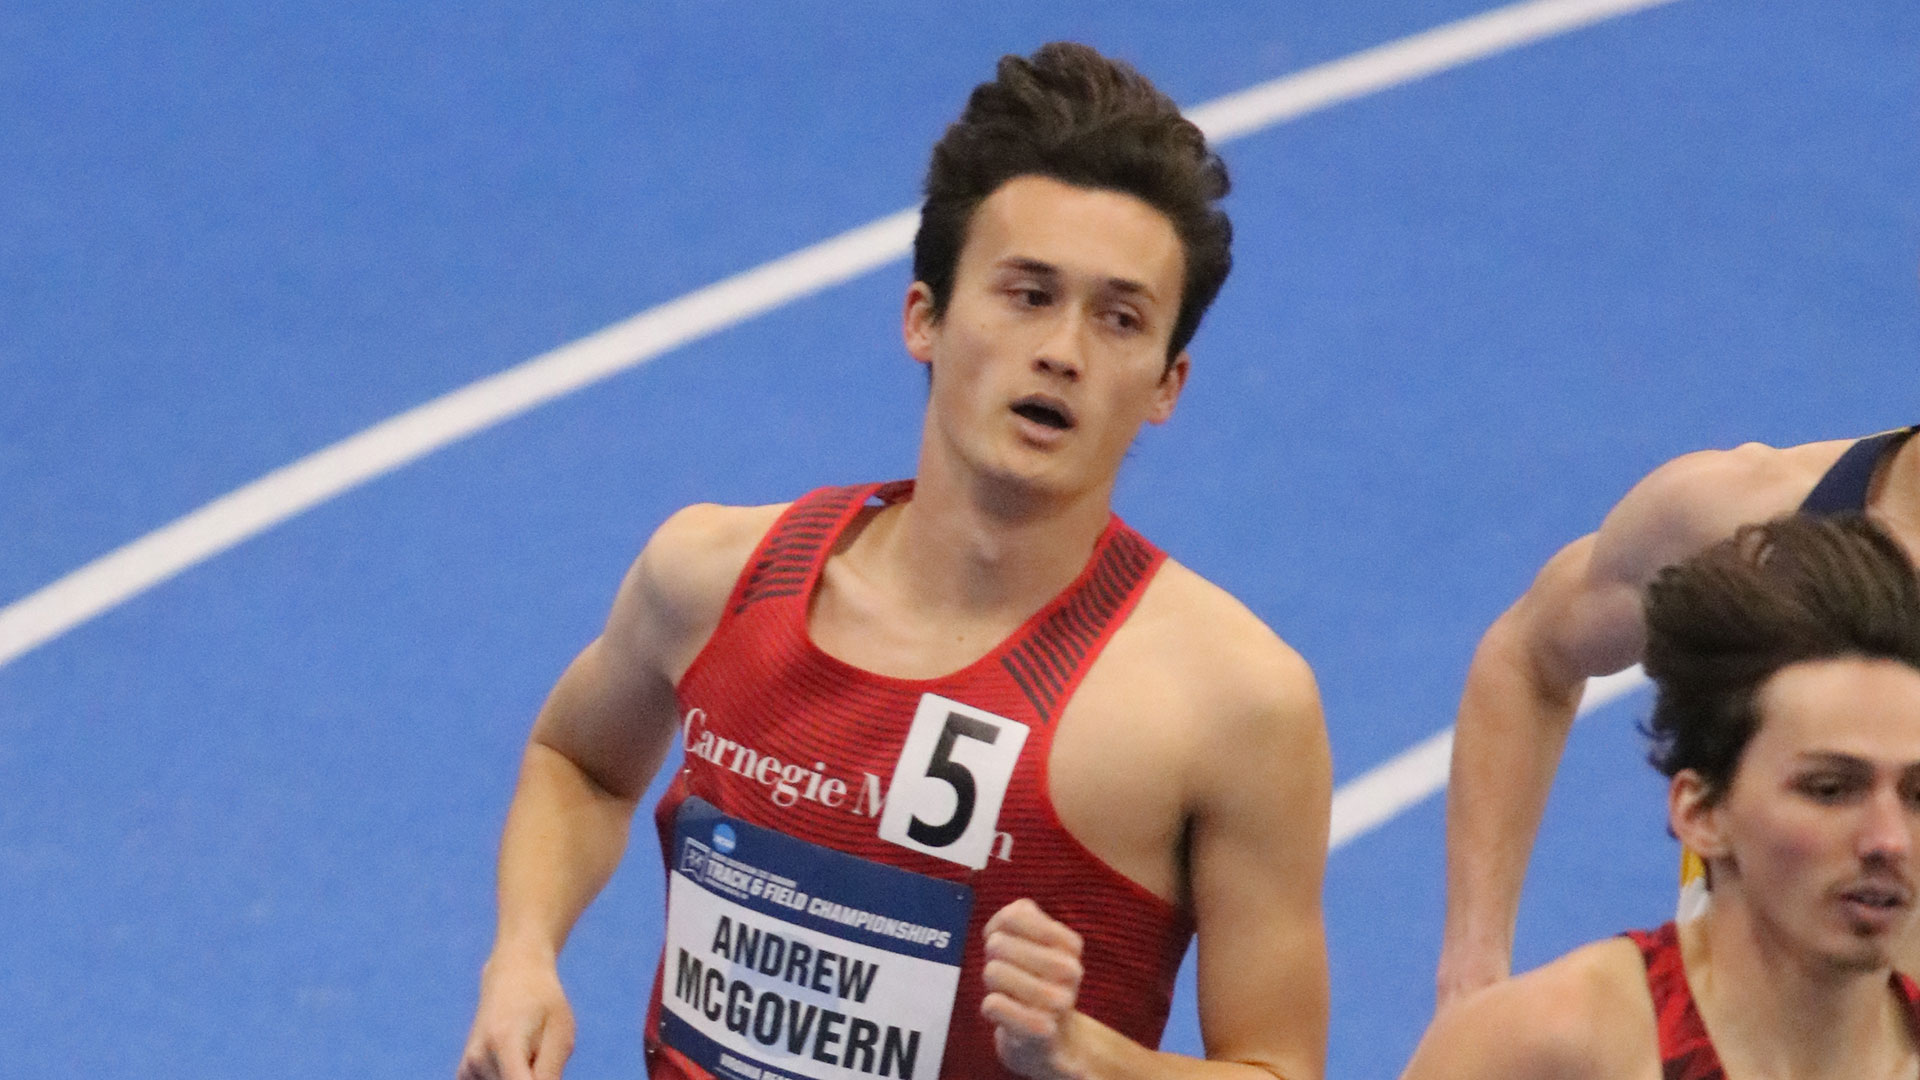 Rich Currently Second in Heptathlon Following First Day at NCAA Indoor Championships, McGovern Competes in 800